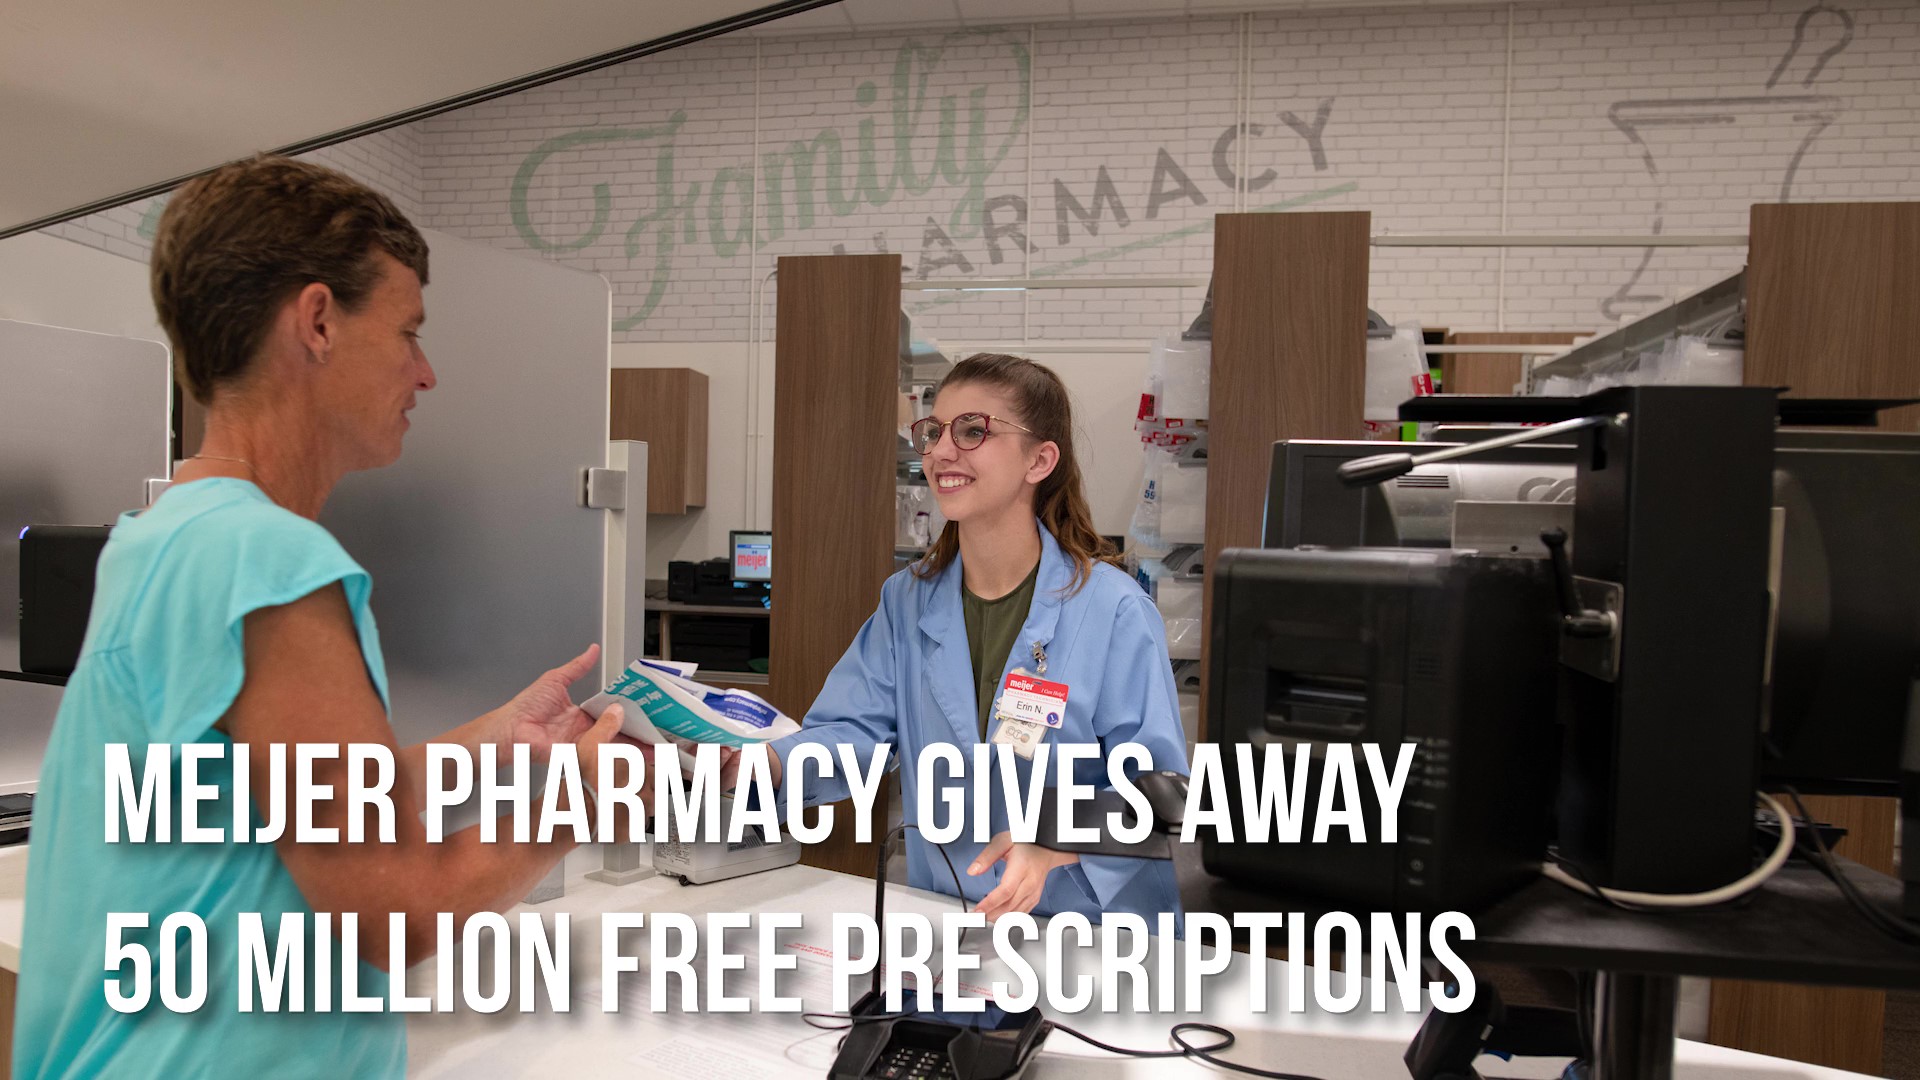 Meijer pharmacies marked a major milestone this week in helping customers lower their healthcare costs. The Midwestern retailer’s Free Prescription Drug program reached 50 million prescriptions filled since its launch in 2006, saving customers more than $650 million.